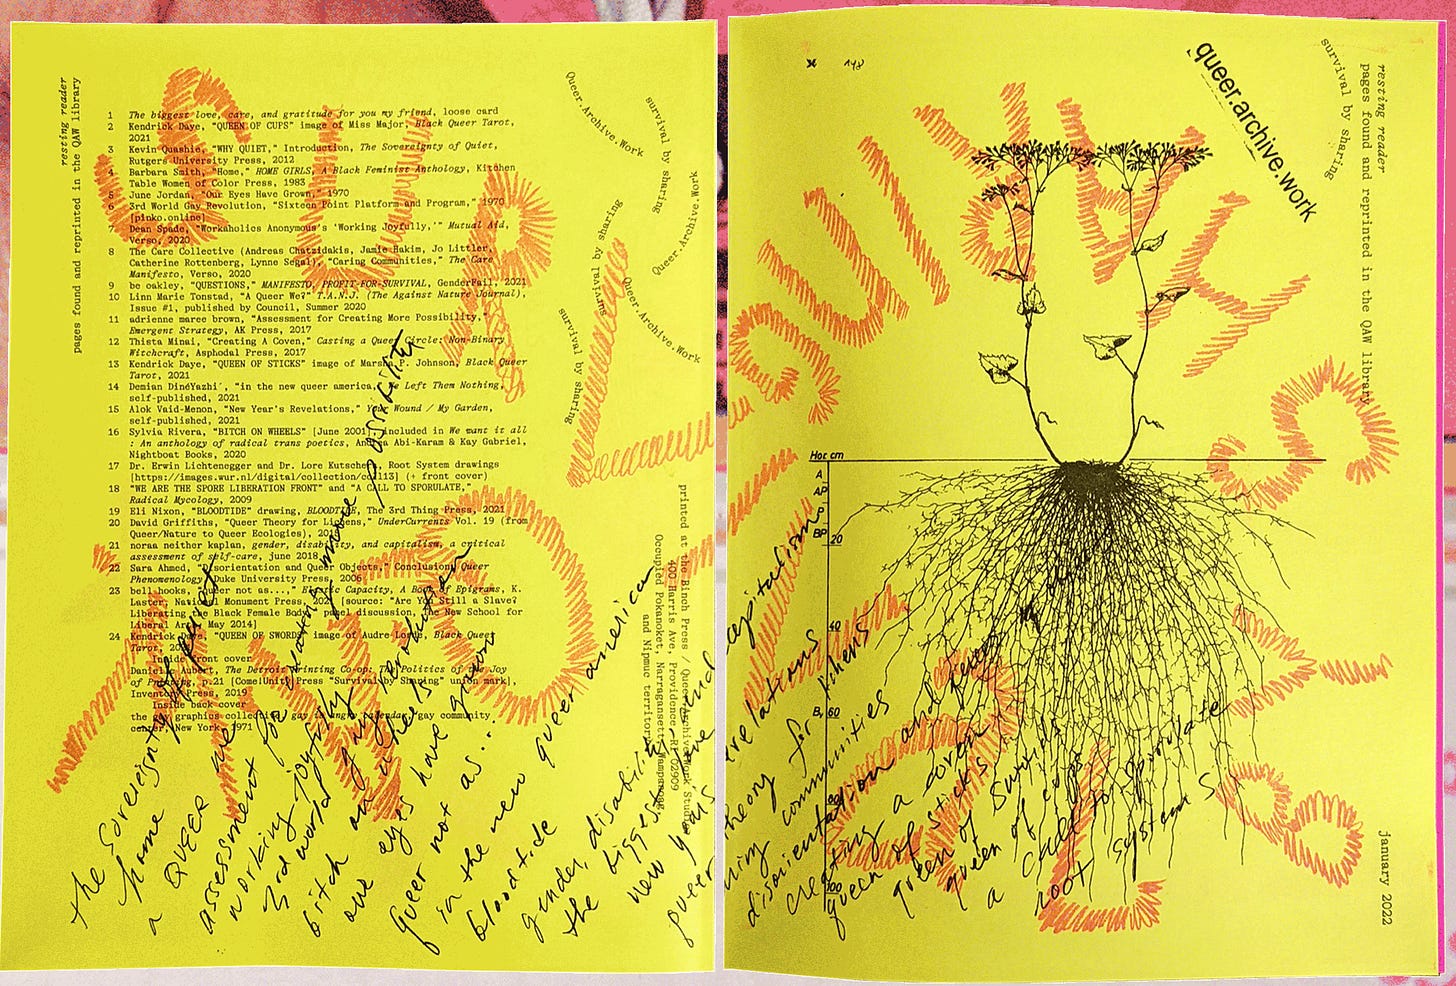 Back and front covers of Resting Reader on yellow paper with orange hand-drawn type saying: Q.A.W. SURVIVAL BY SHARING. There is also a list of contents, scrawled notes and a black ink drawing of a plant and its underground roots.